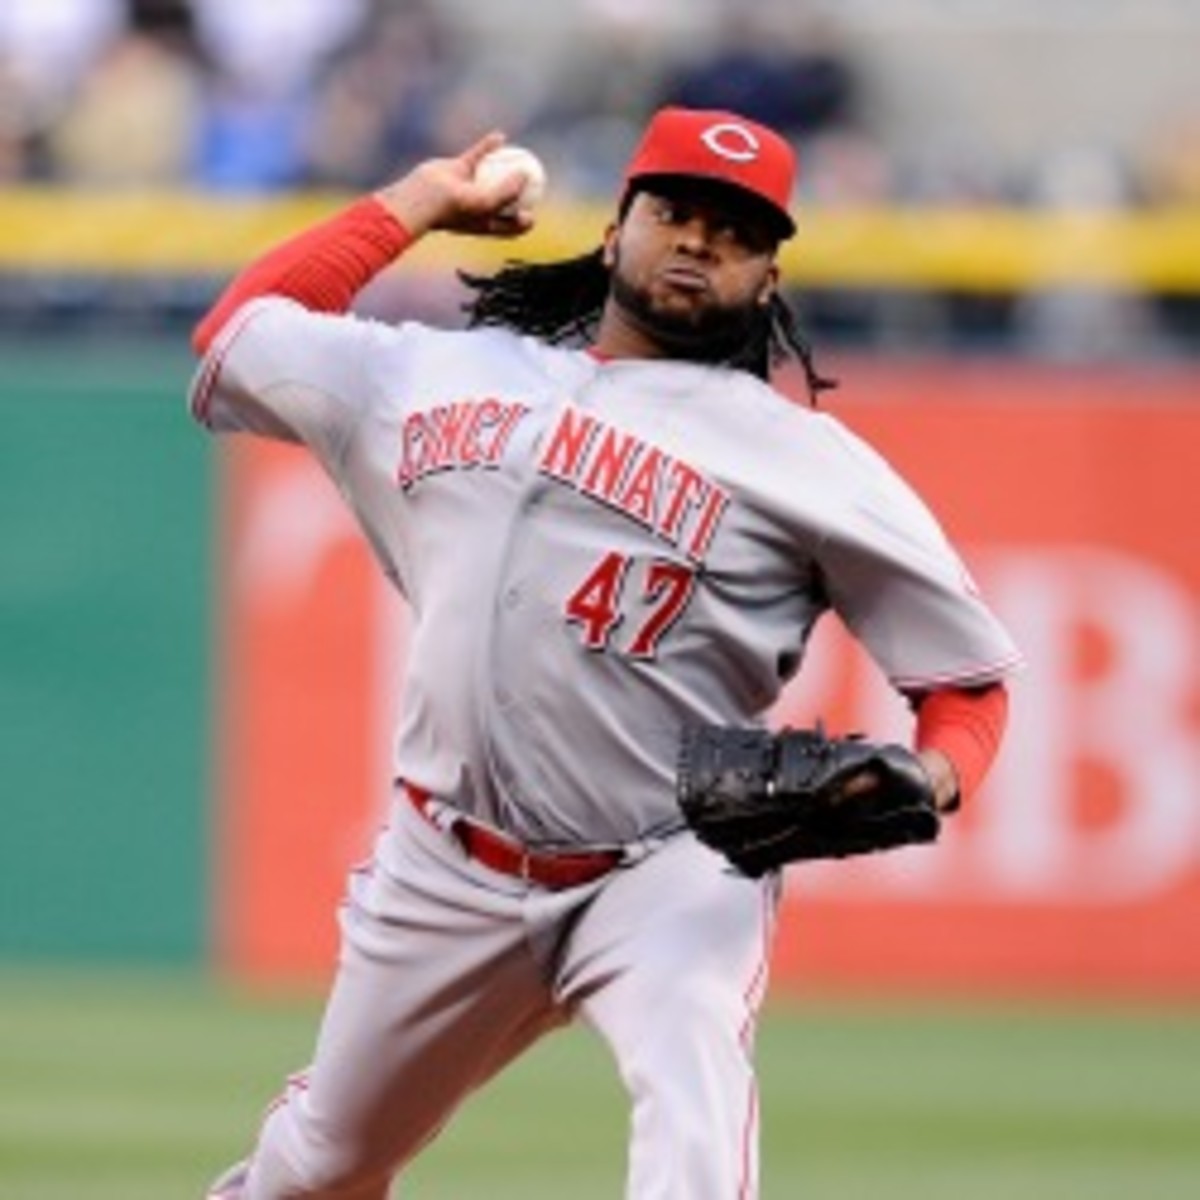 Reds ace Johnny Cueto left his start early because of a triceps injury. (Joe Sargent/Getty Images)